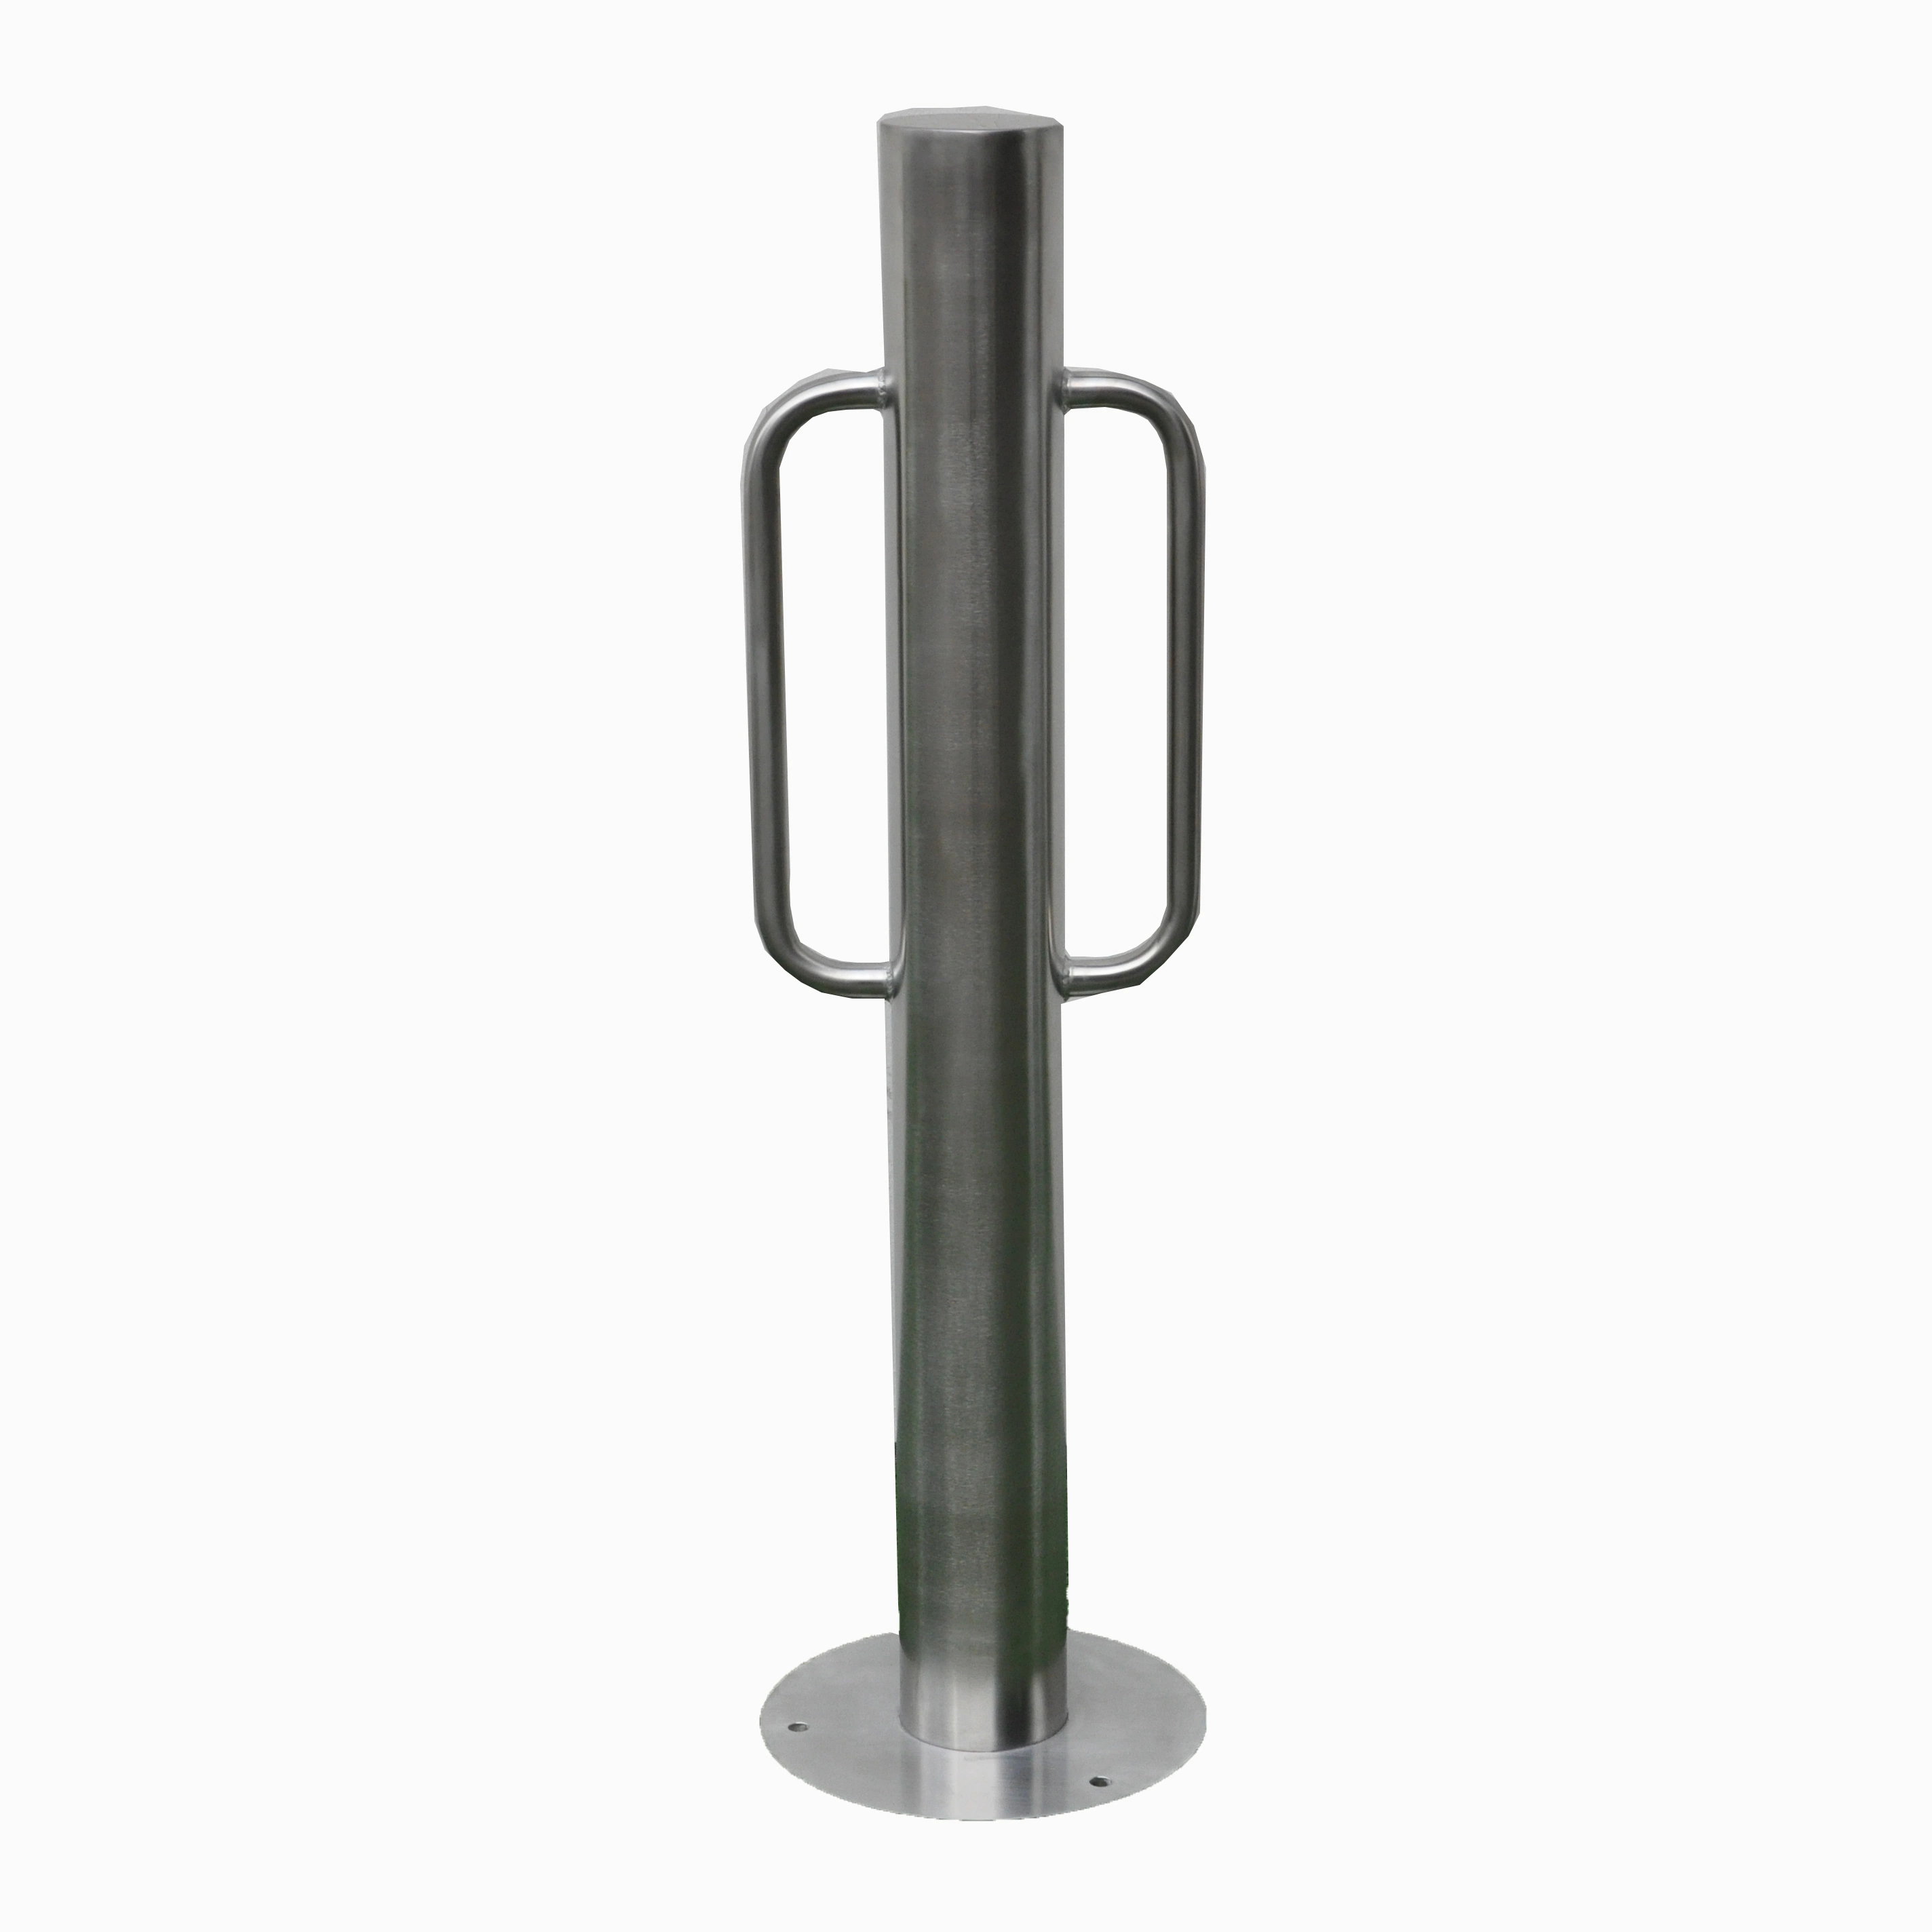 Street Safety Stainless Steel Mooring Parking Bollard with Signs on The Top